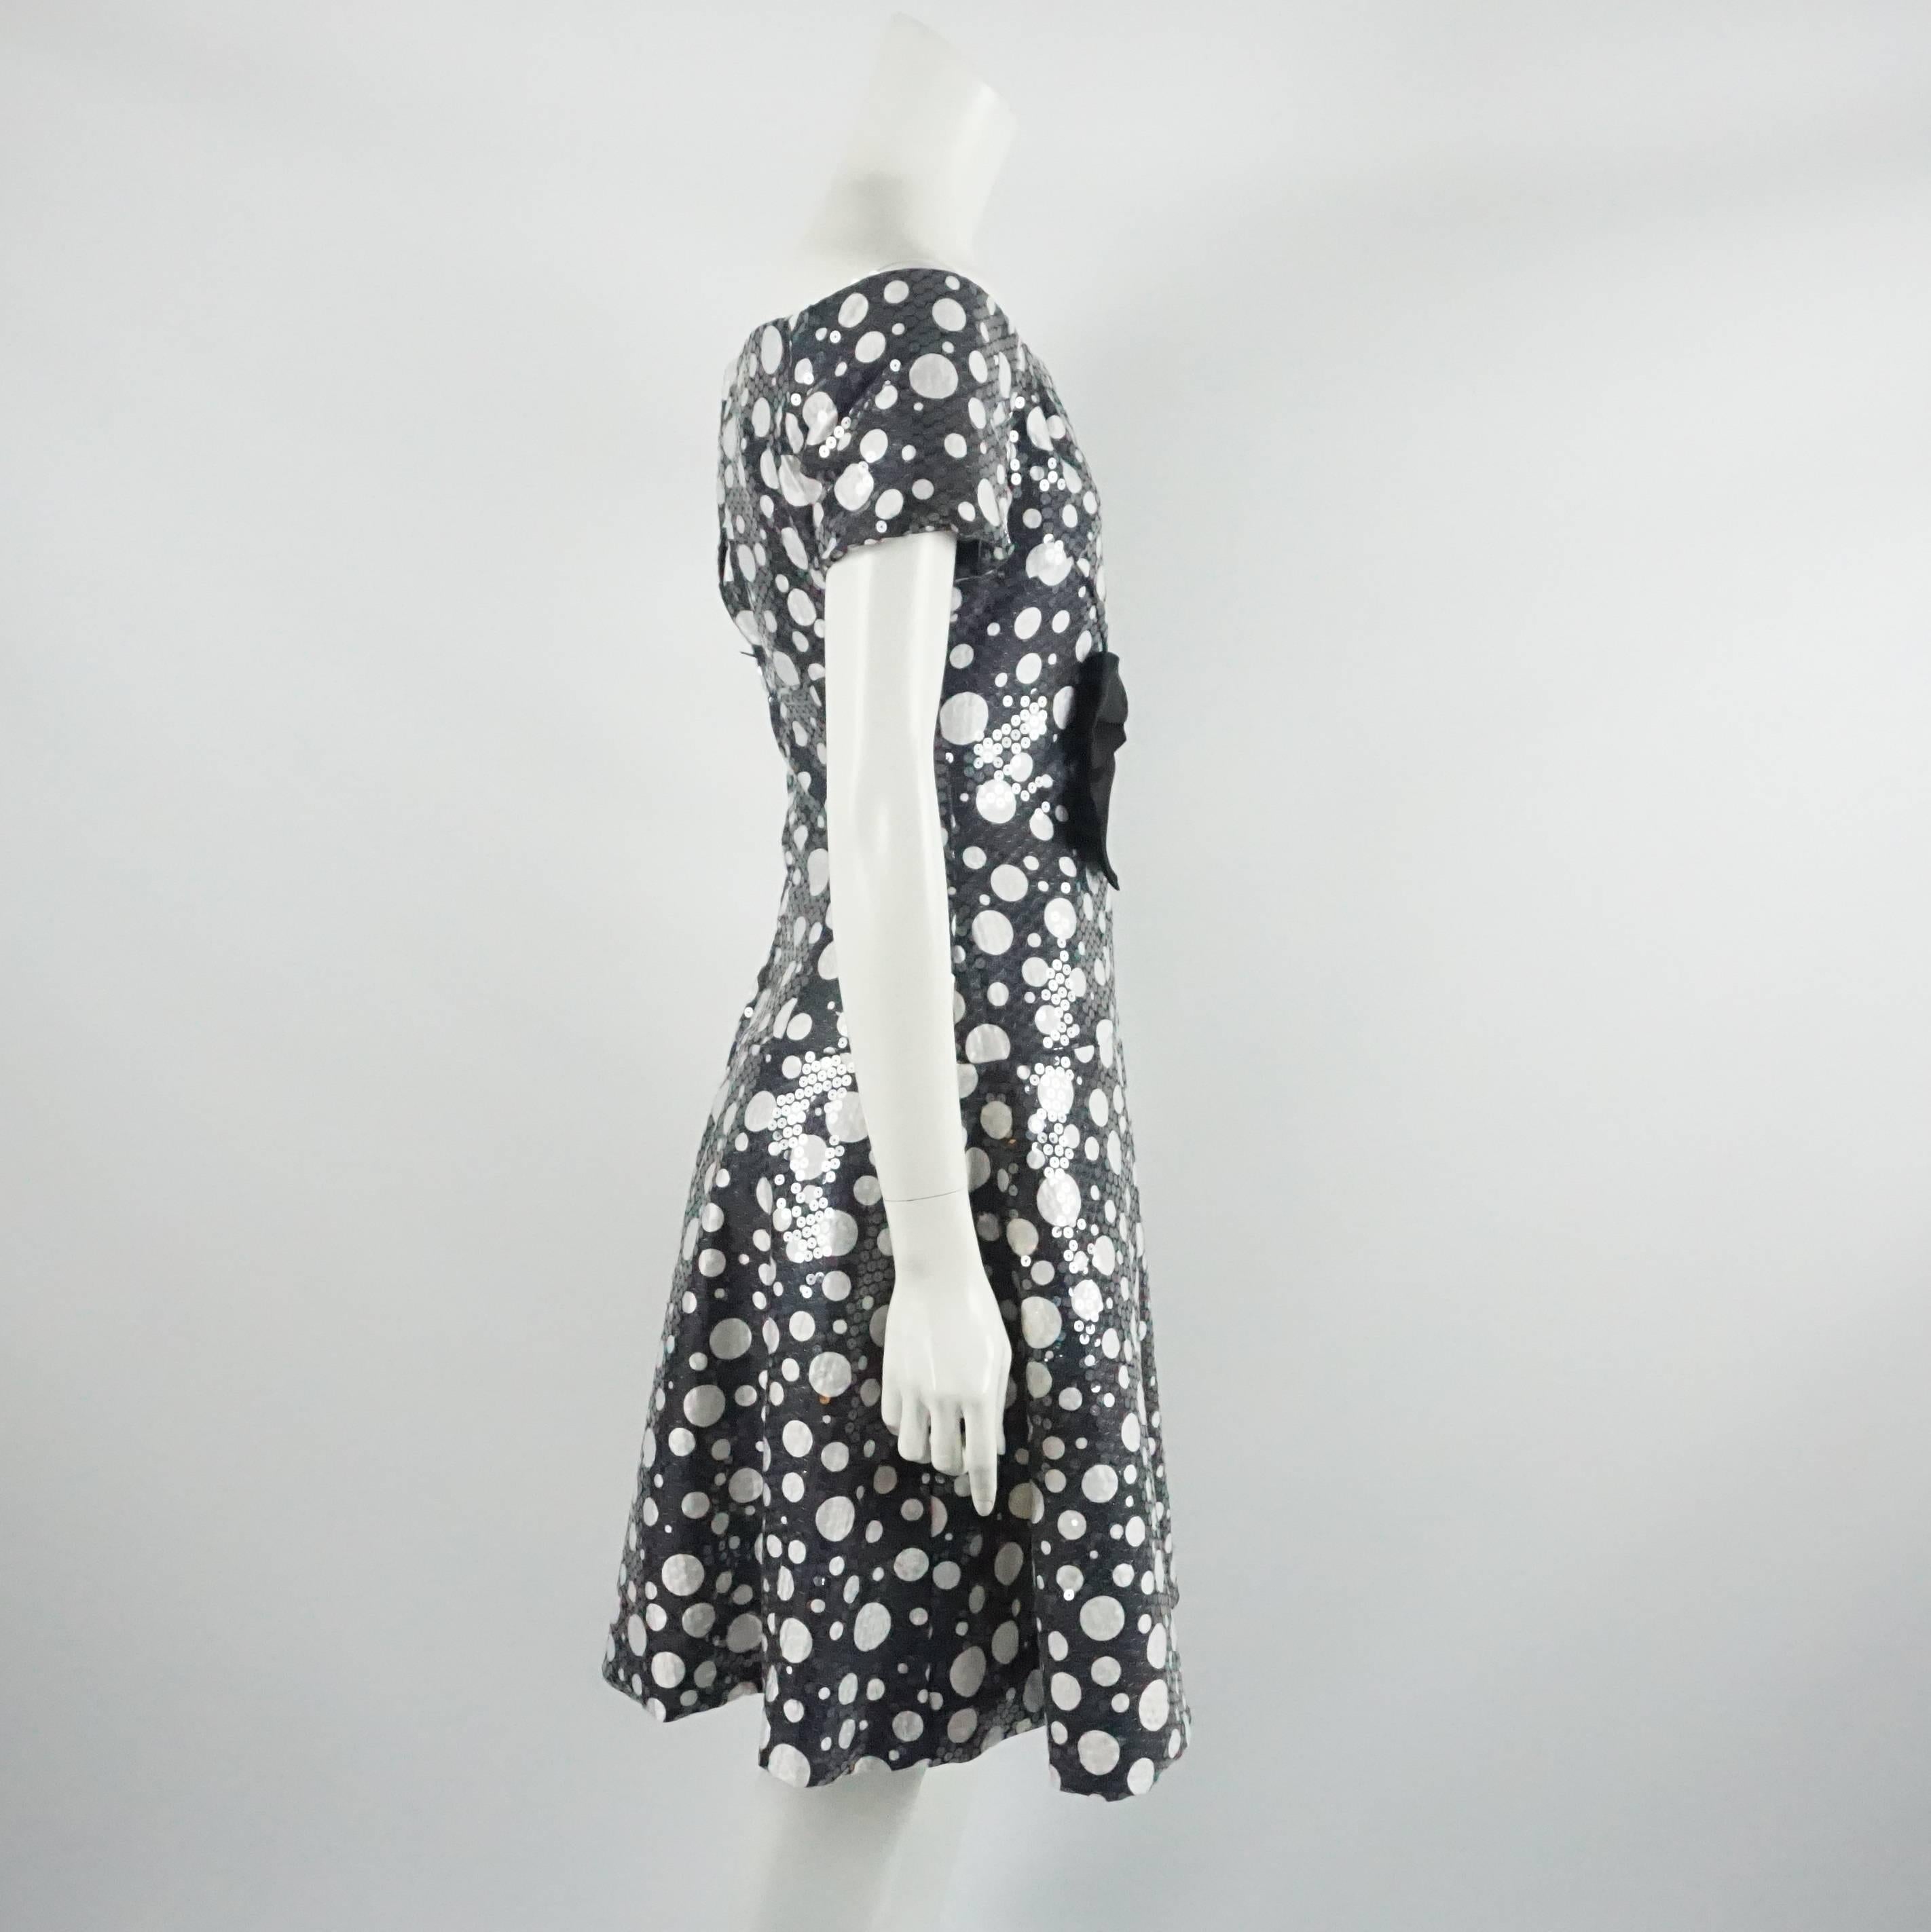 Scaasi Black and White Polka Dot Sequin Dress - S - 1980's. This Scaasi black and white polka dot dress is short sleeved and has clear sequins on the entirety of the fabric. The dress also has a boat neck line black bra on the inside, a large front